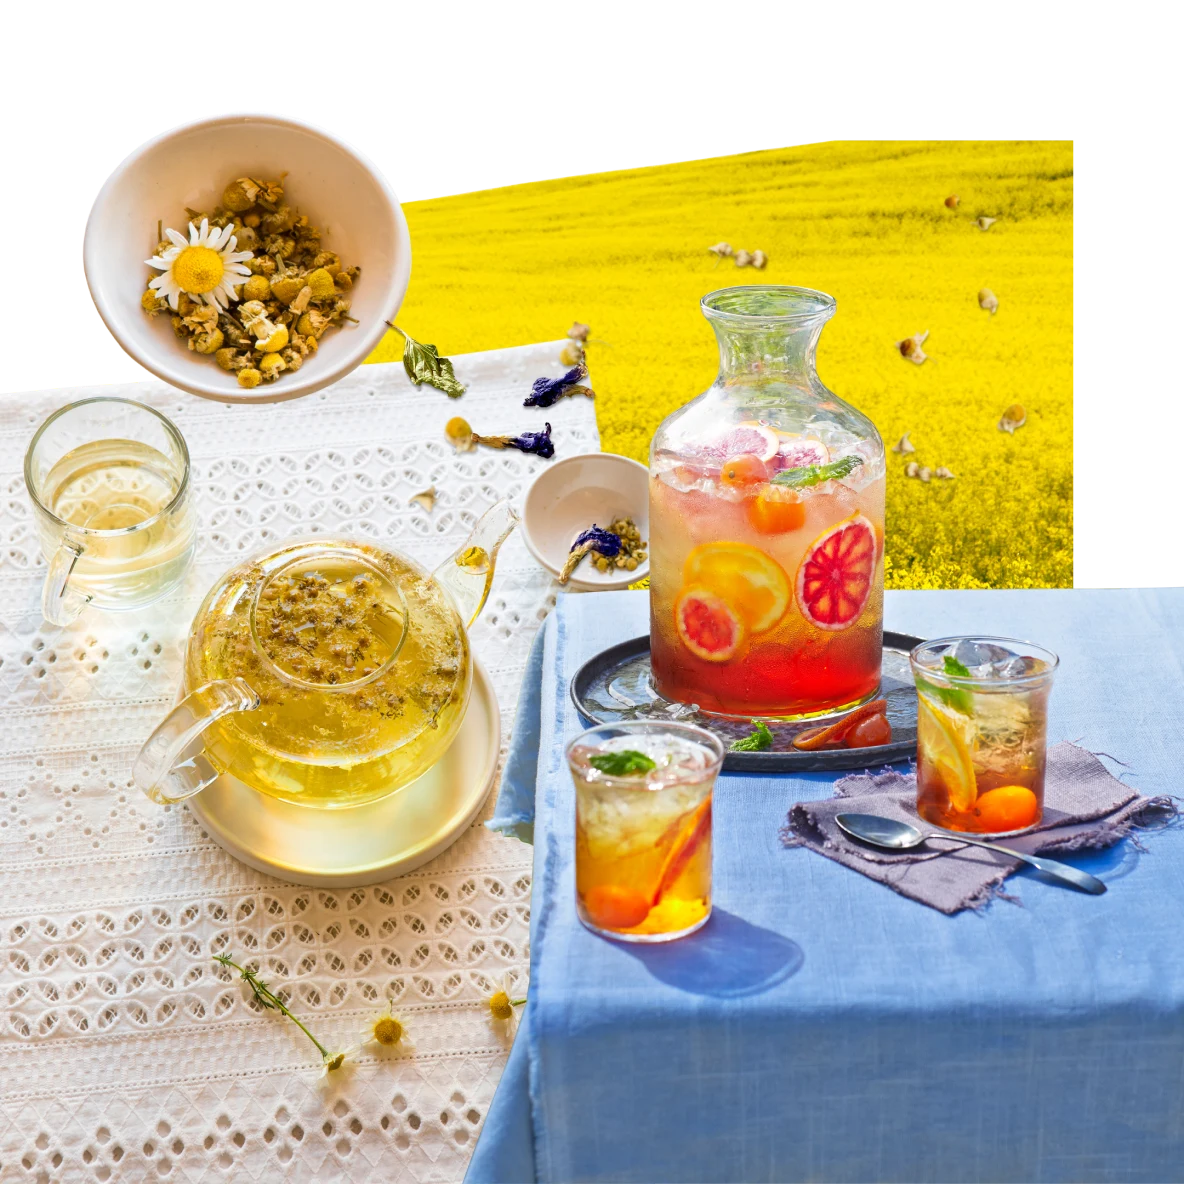 Collage of tea-themed items. Carafe of citrus-flavored iced tea on a table with blue tablecloth and two glasses filled with iced tea. Glass teapot filled with herbal tea next to glass of tea and cup of herbal tea leaves. Field of yellow flowers in the background.